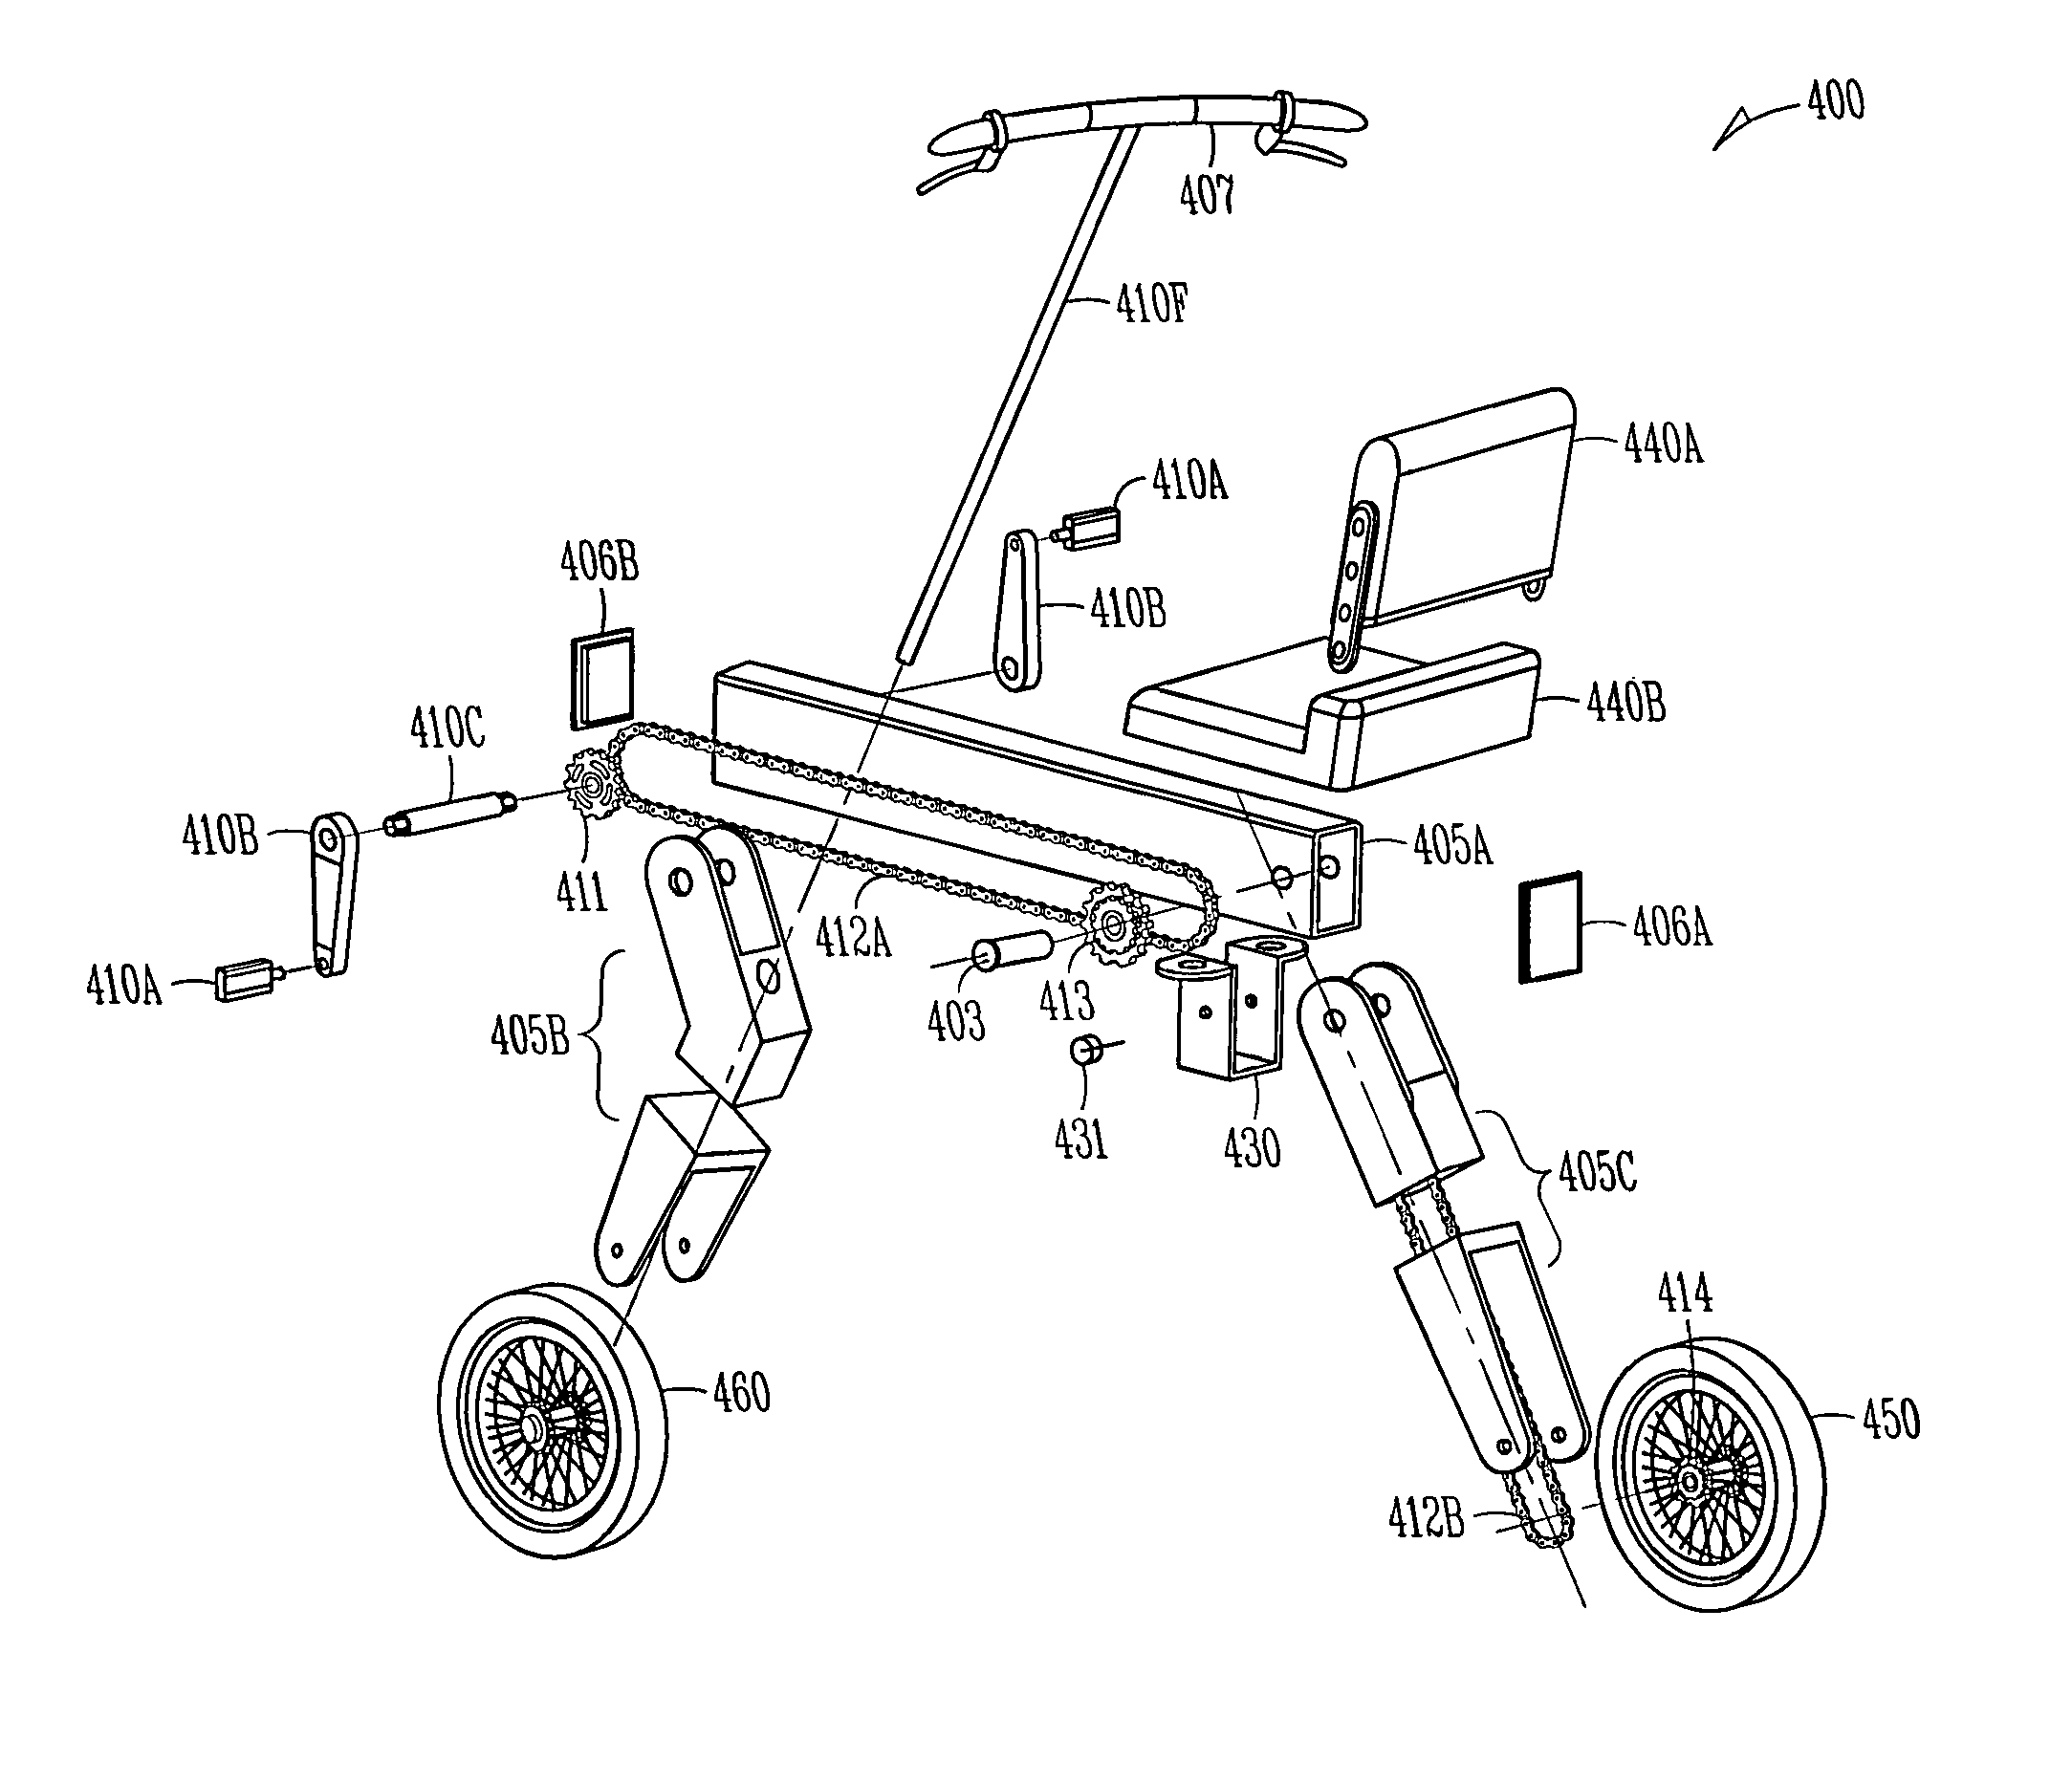 Carry-on bicycle contained by a single channel in a chassis